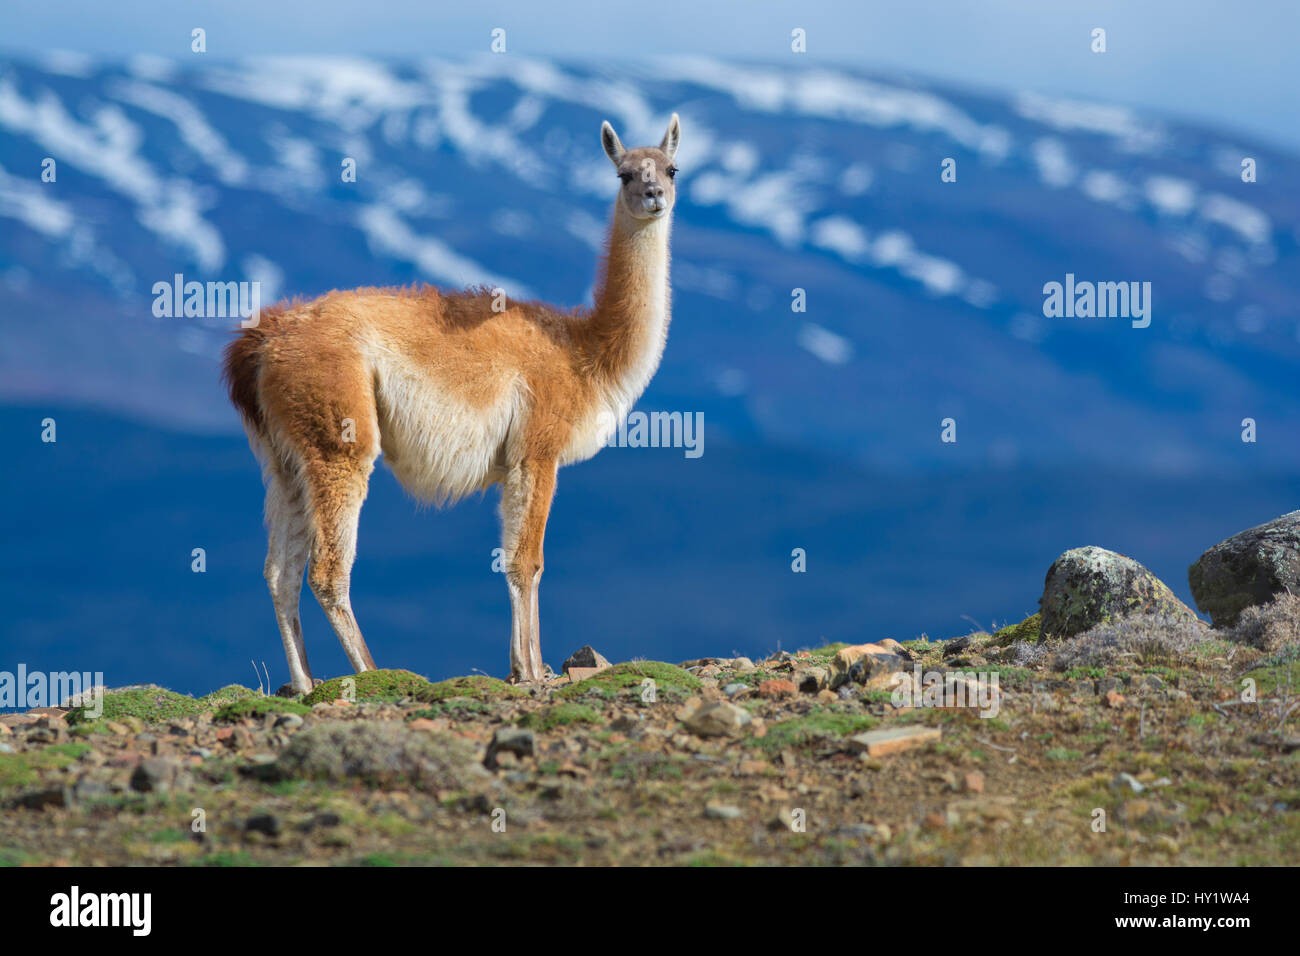 Guanaco (Lama Guanicoe) standing in front of mountain landscape, Torres del Paine National Park, Chile Stock Photo